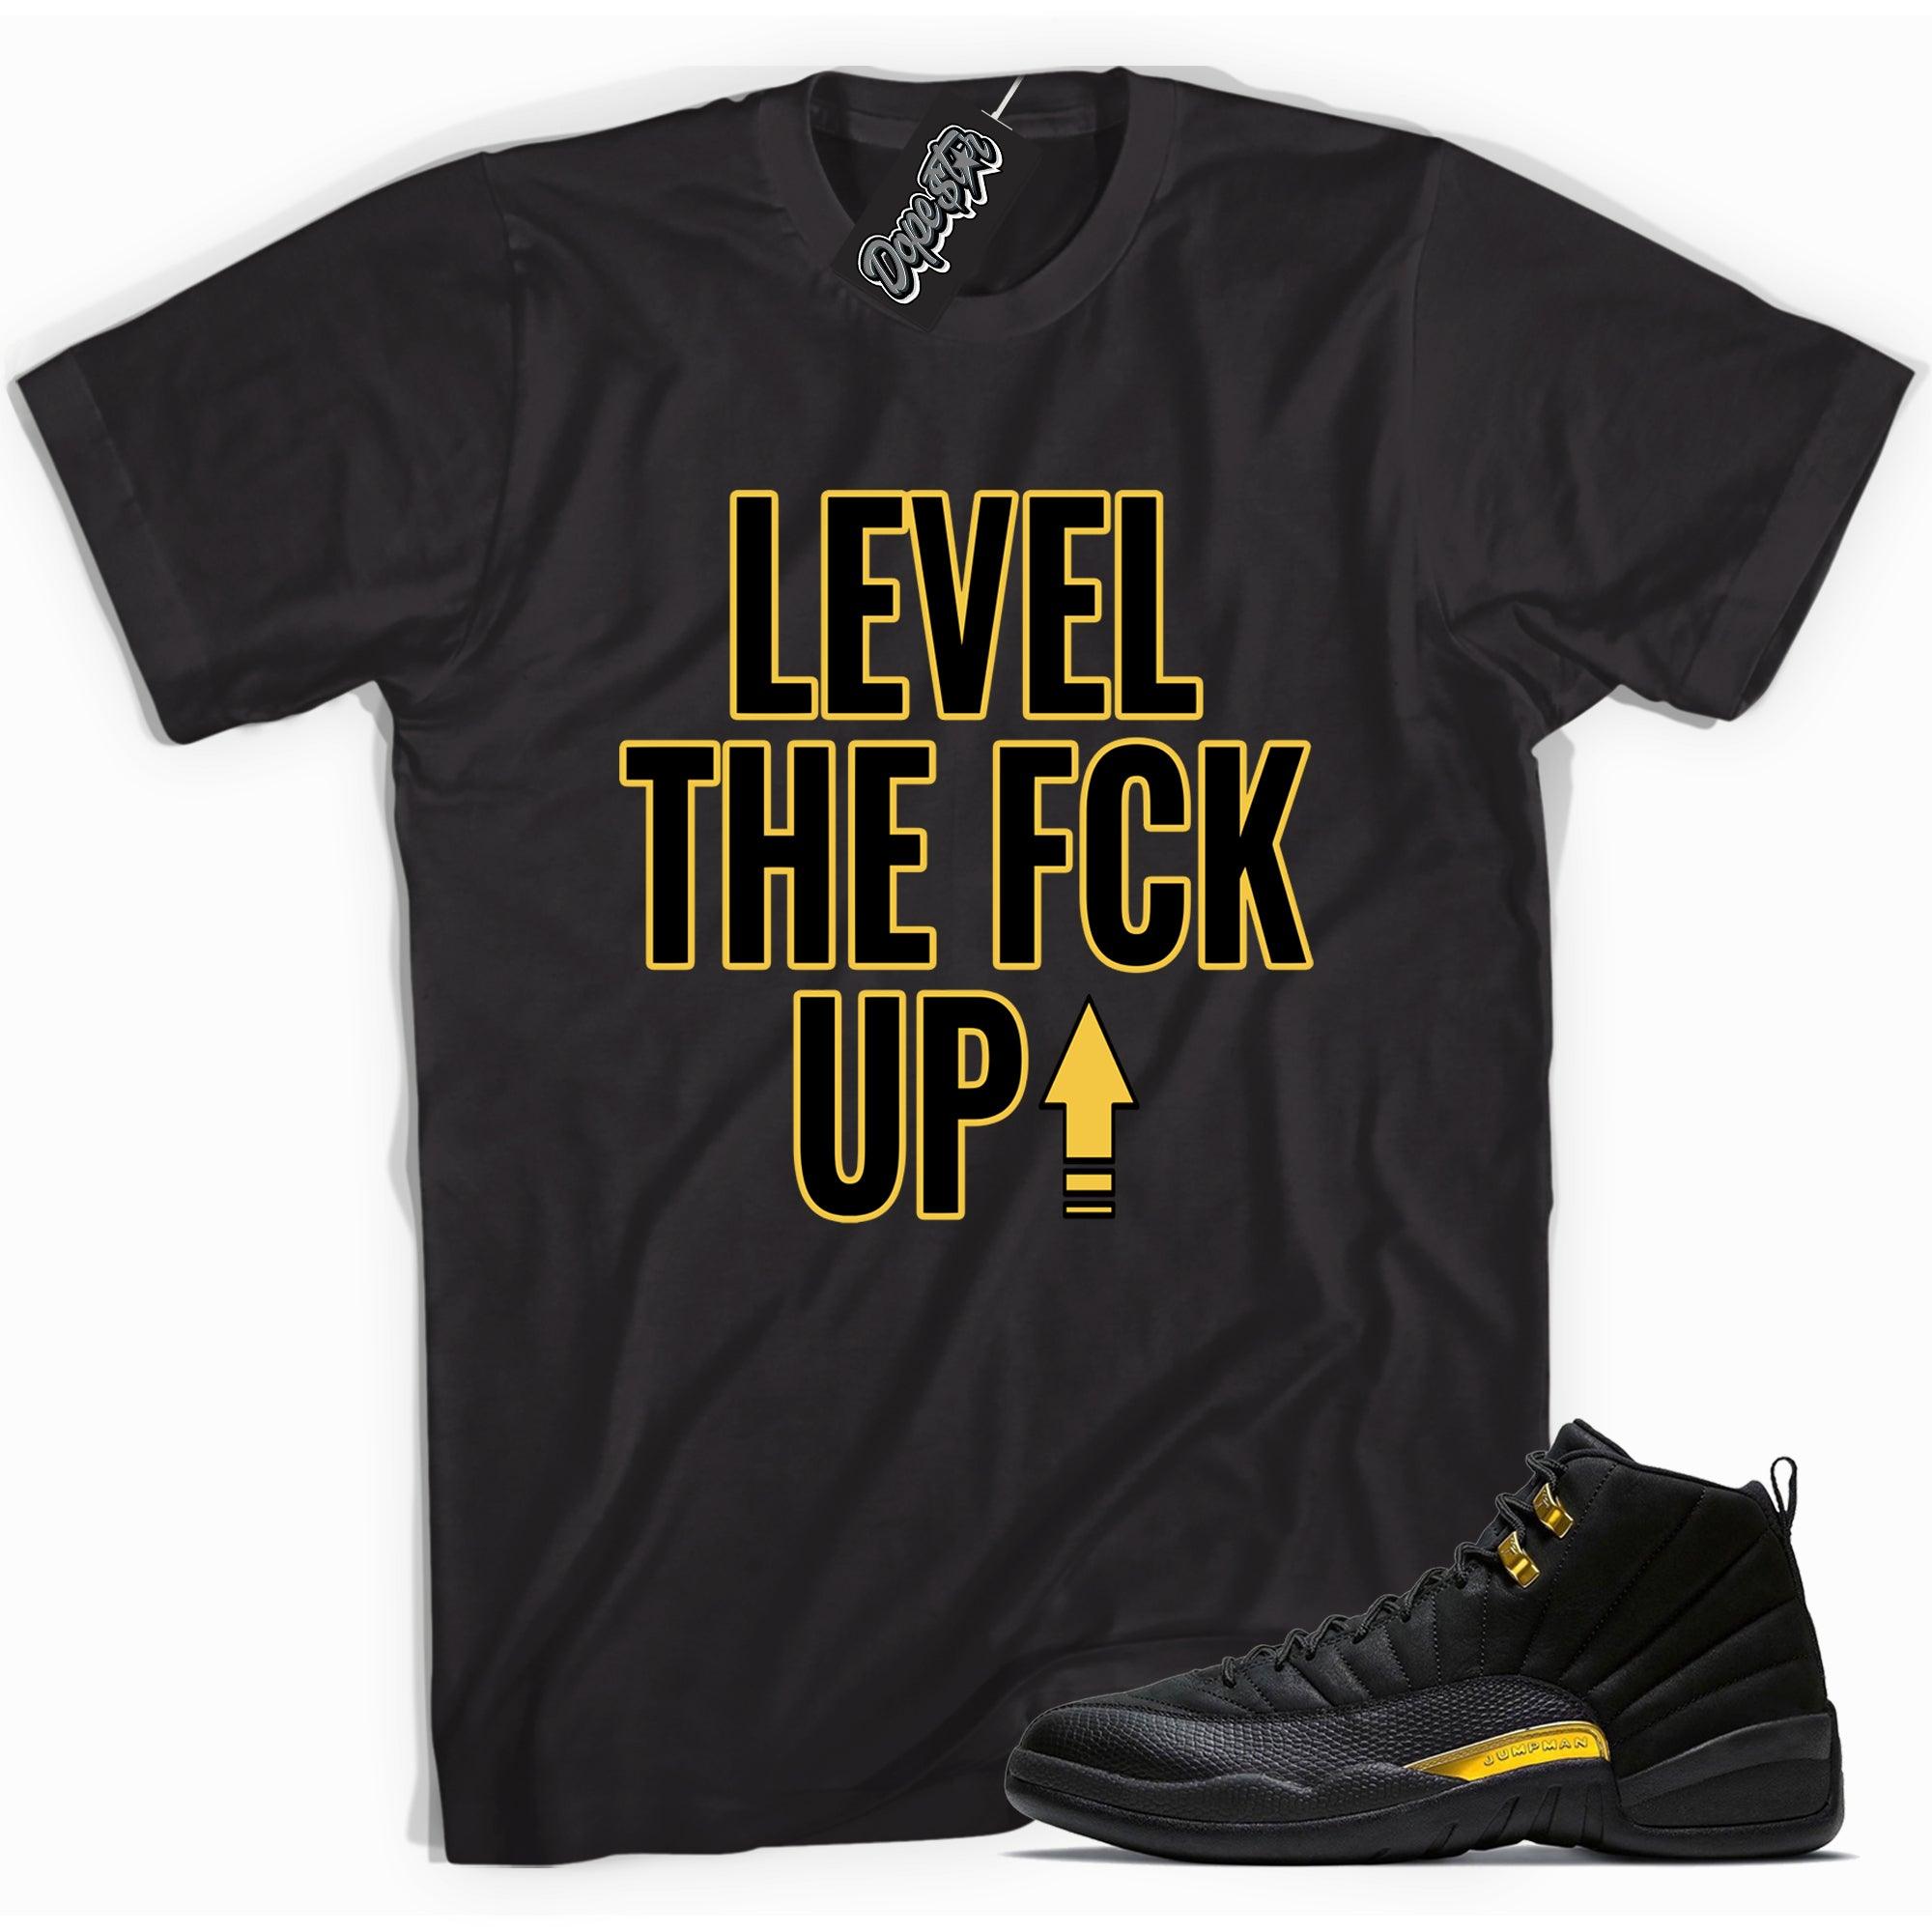 Cool black graphic tee with 'Level Up' print, that perfectly matches Air Jordan 12 black taxi sneakers.